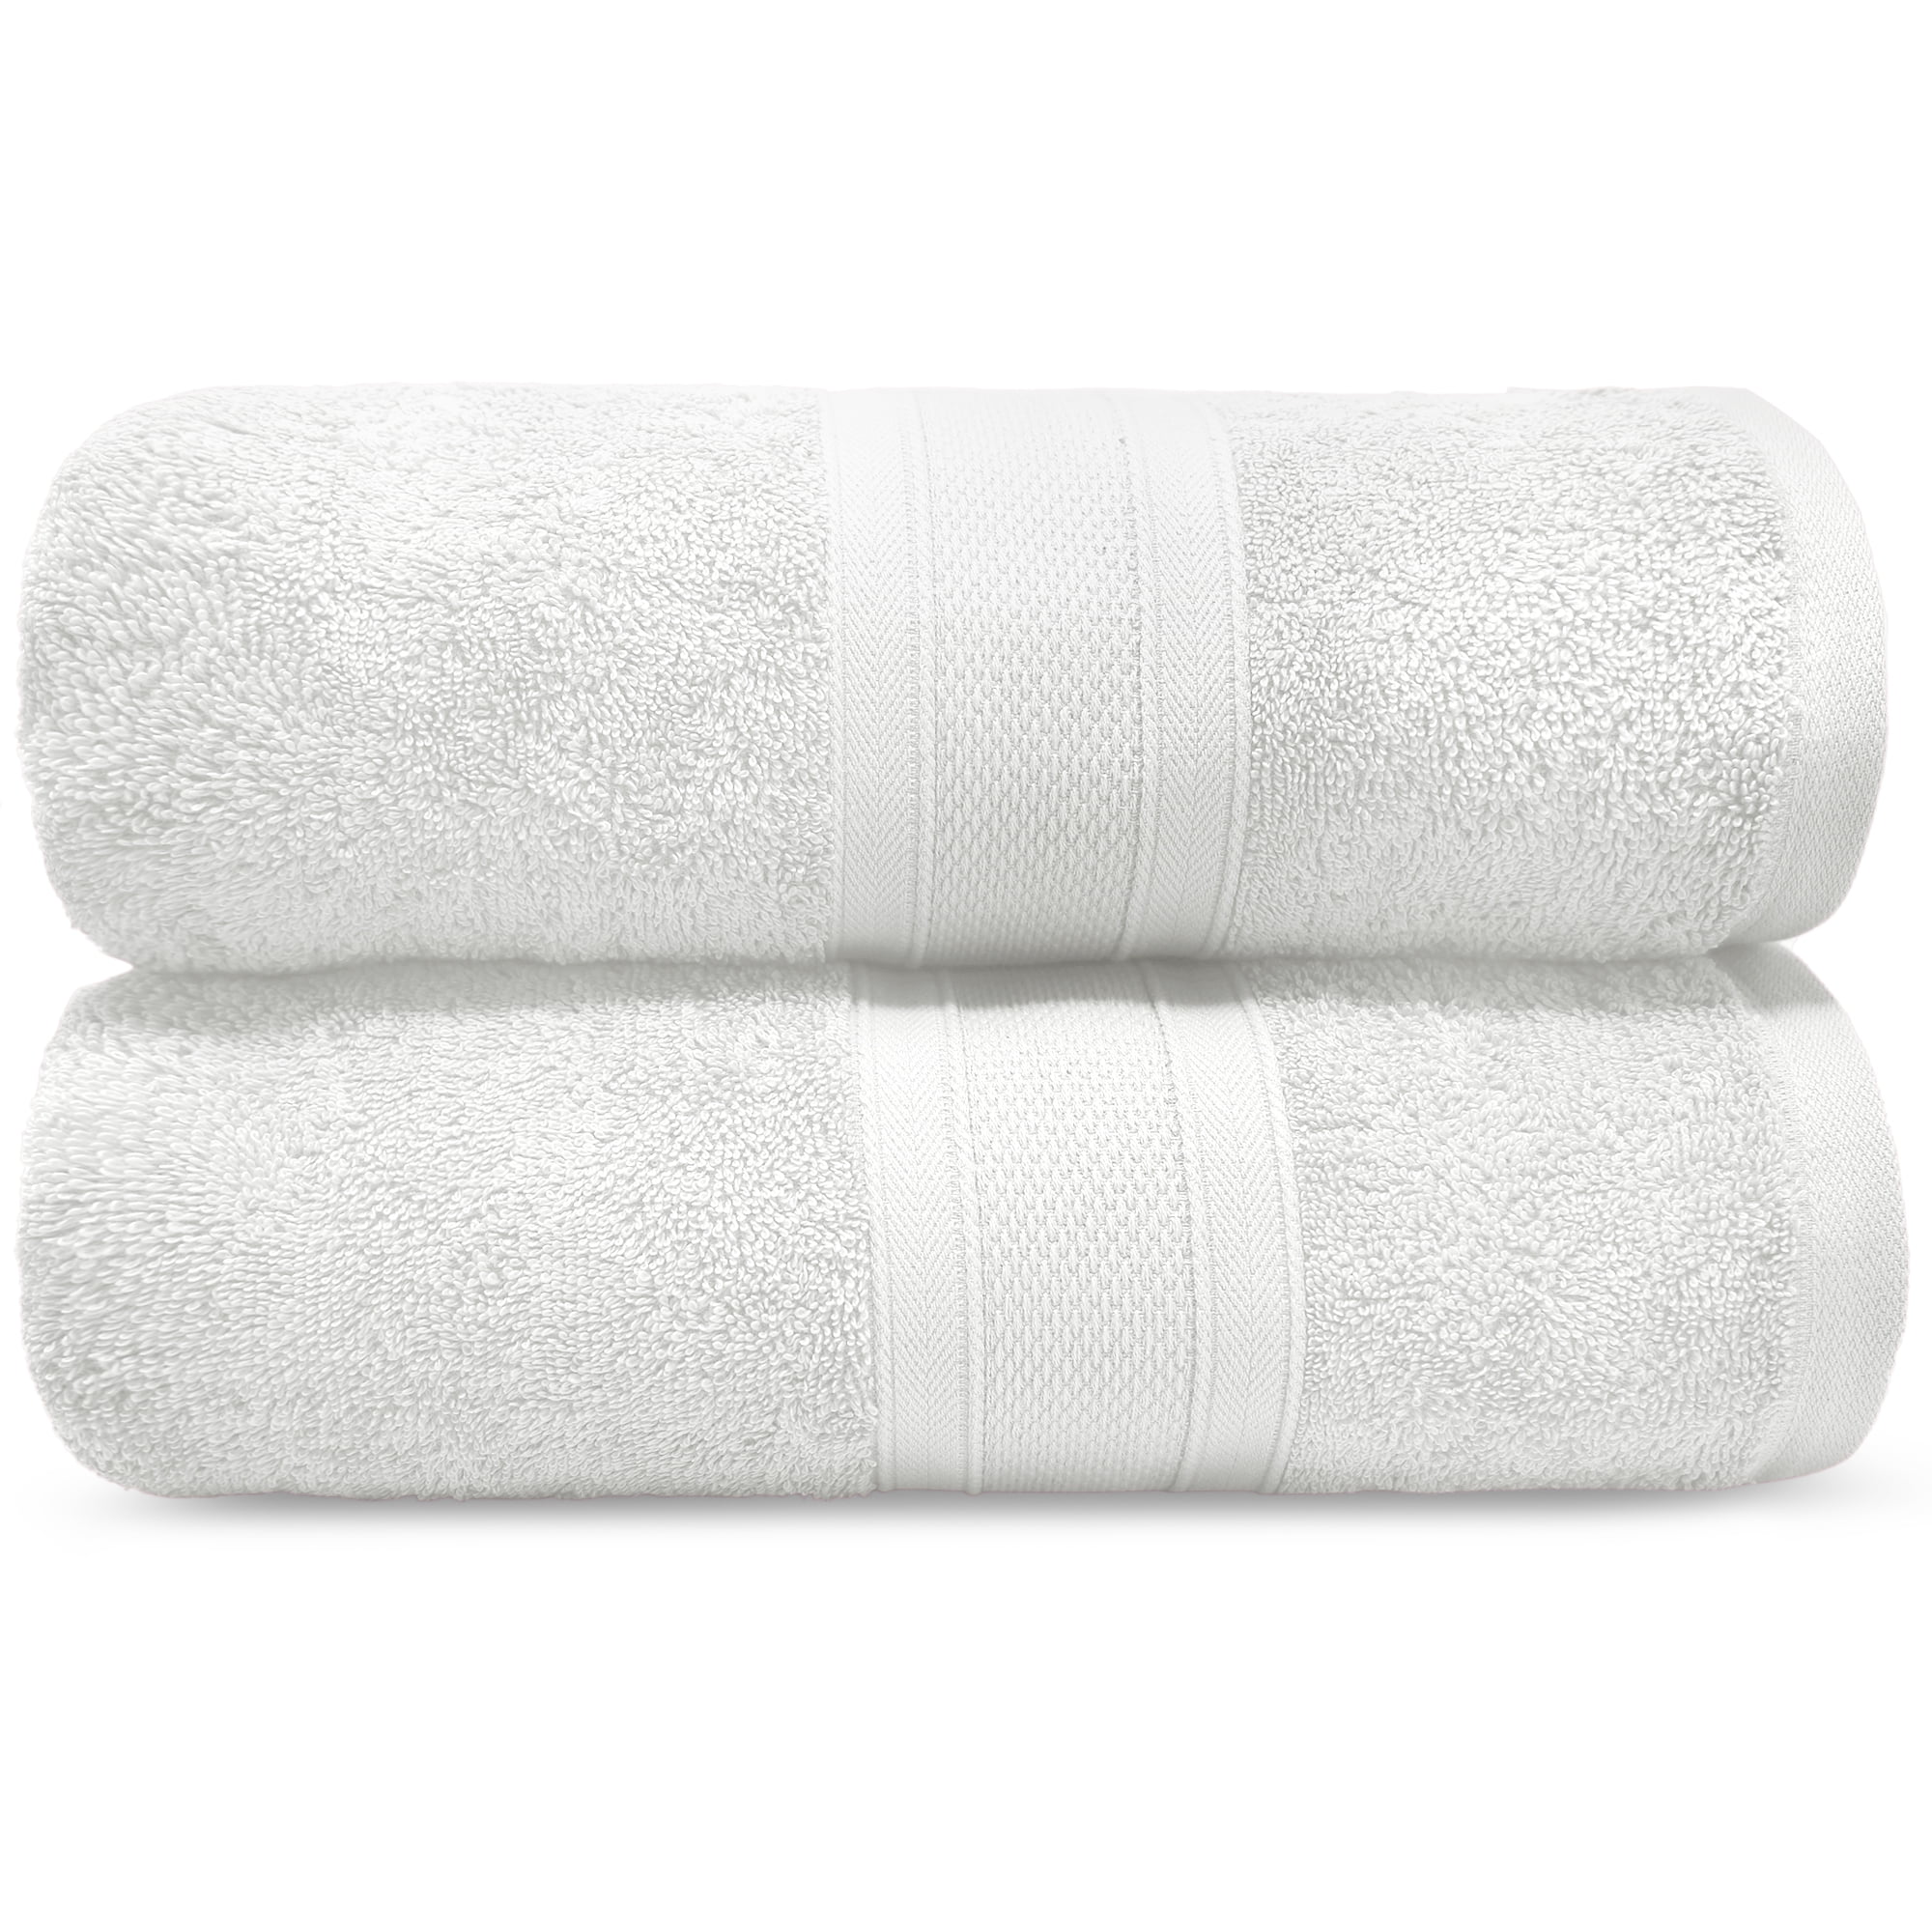 4 BLACK HAND TOWELS SET,%100 NATURAL COTTON 50X90 CM LARGE HOTEL QUALITY 500 GSM ABSORBENT HAND TOWELS